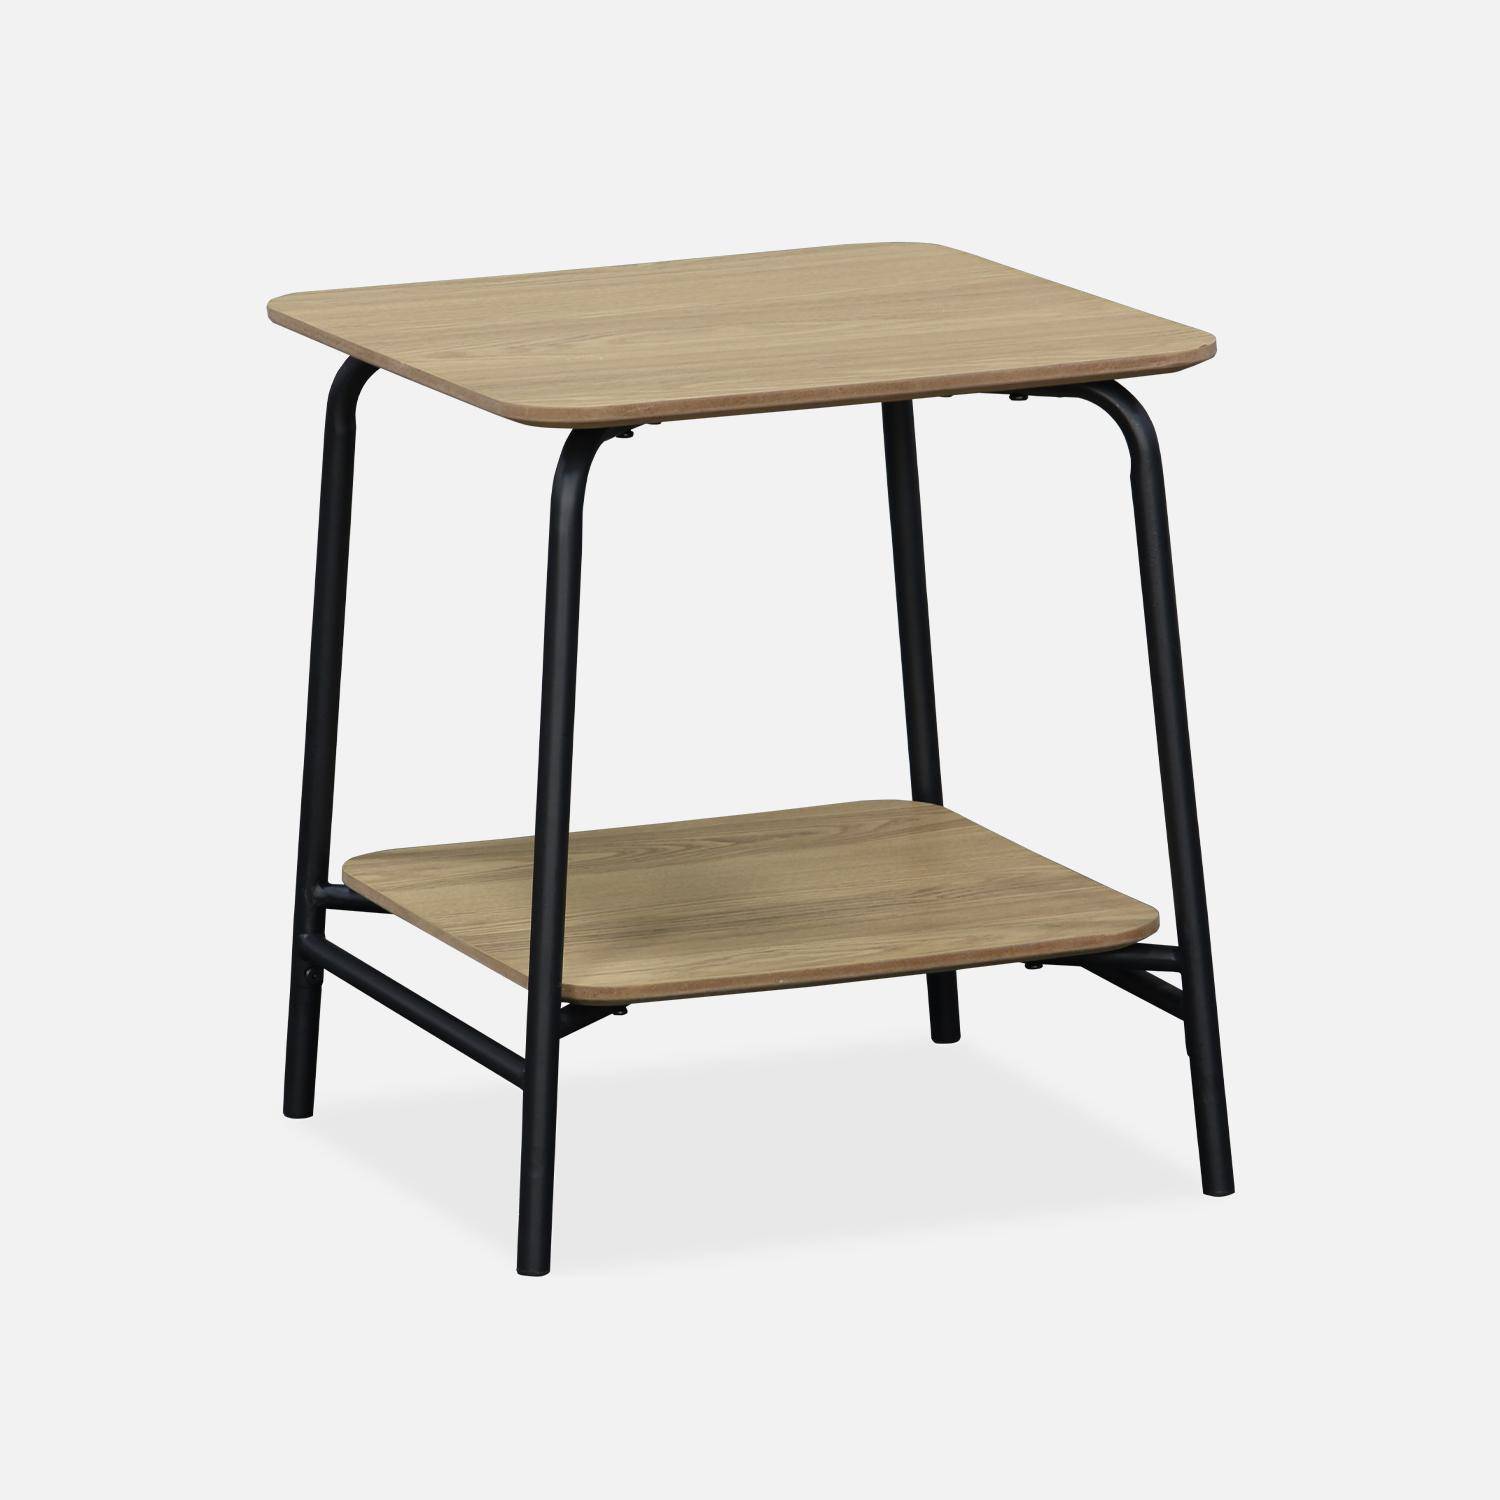 School table effect bedside table in wood decor with steel frame - 1 central shelf Photo1